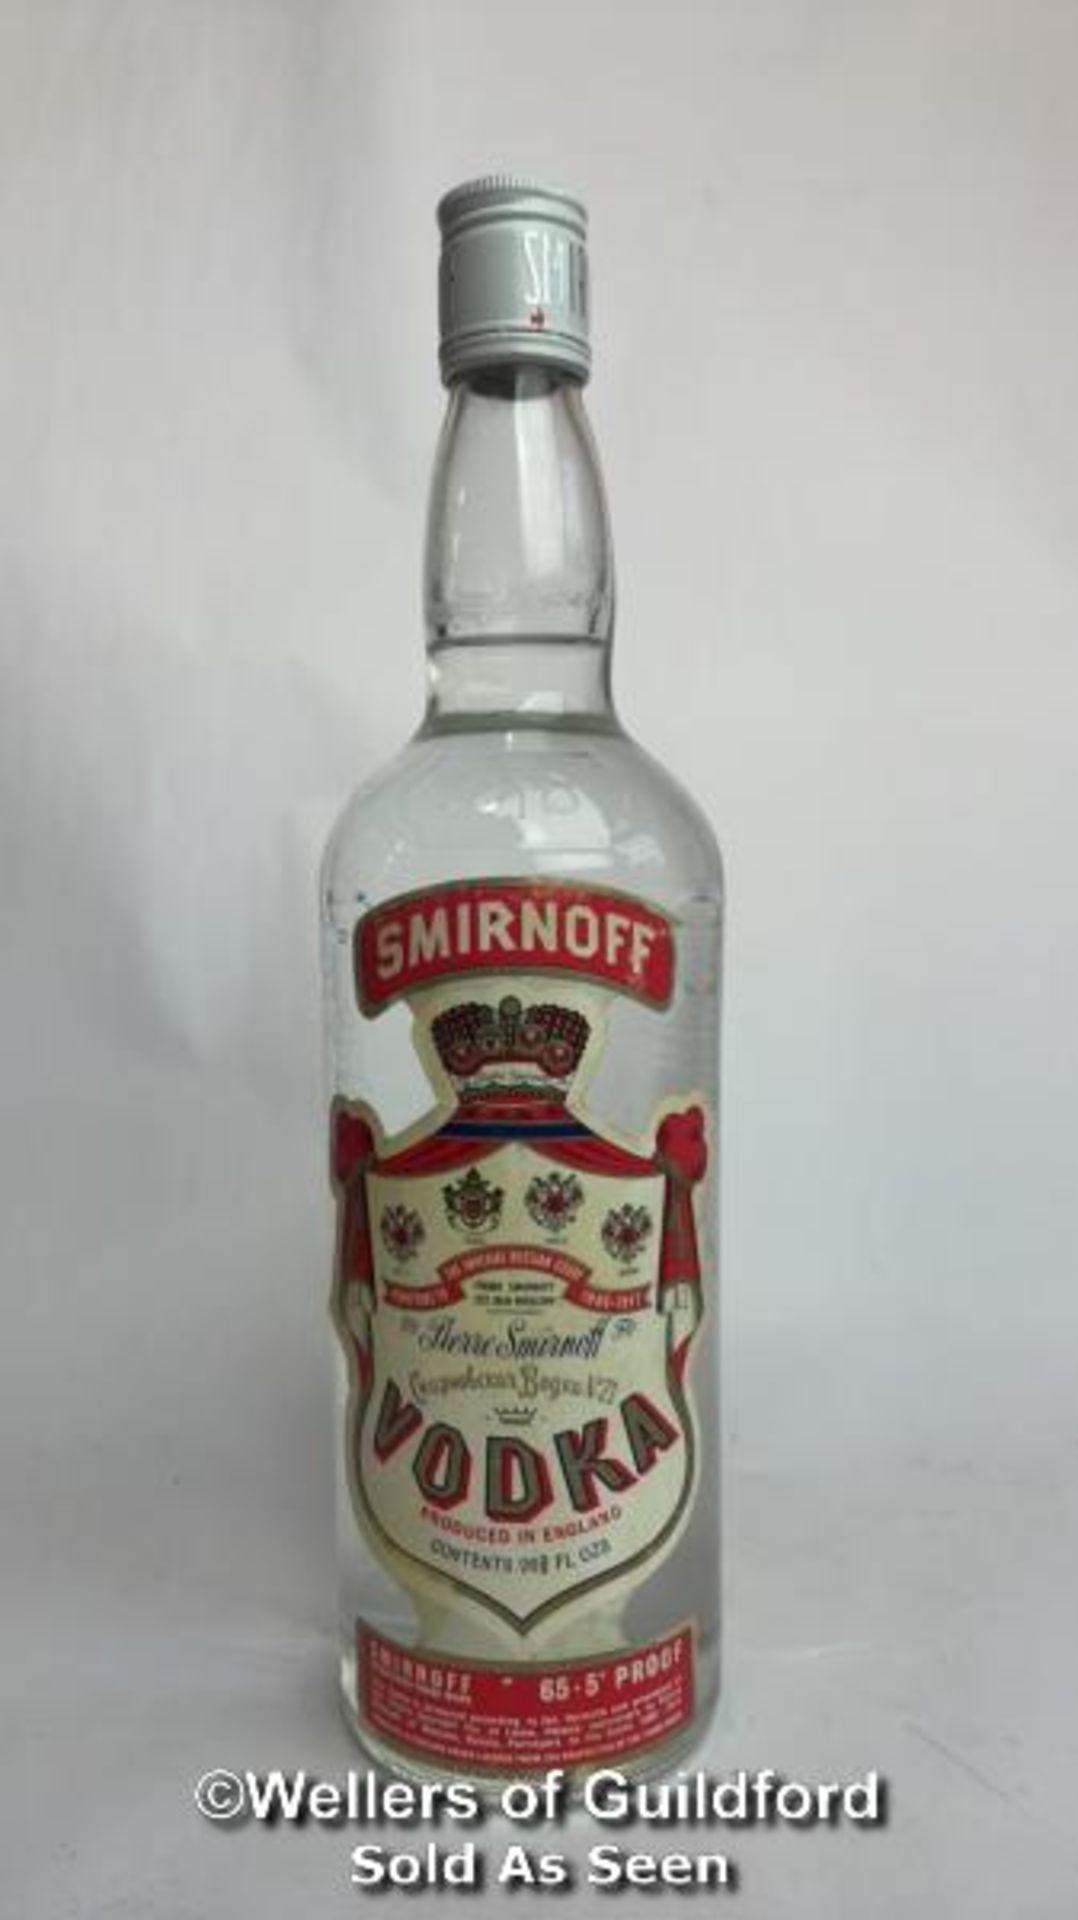 Smirnoff Vodka, 26 2/3fl, 65.5 Proof / Please see images for fill level and general condition.